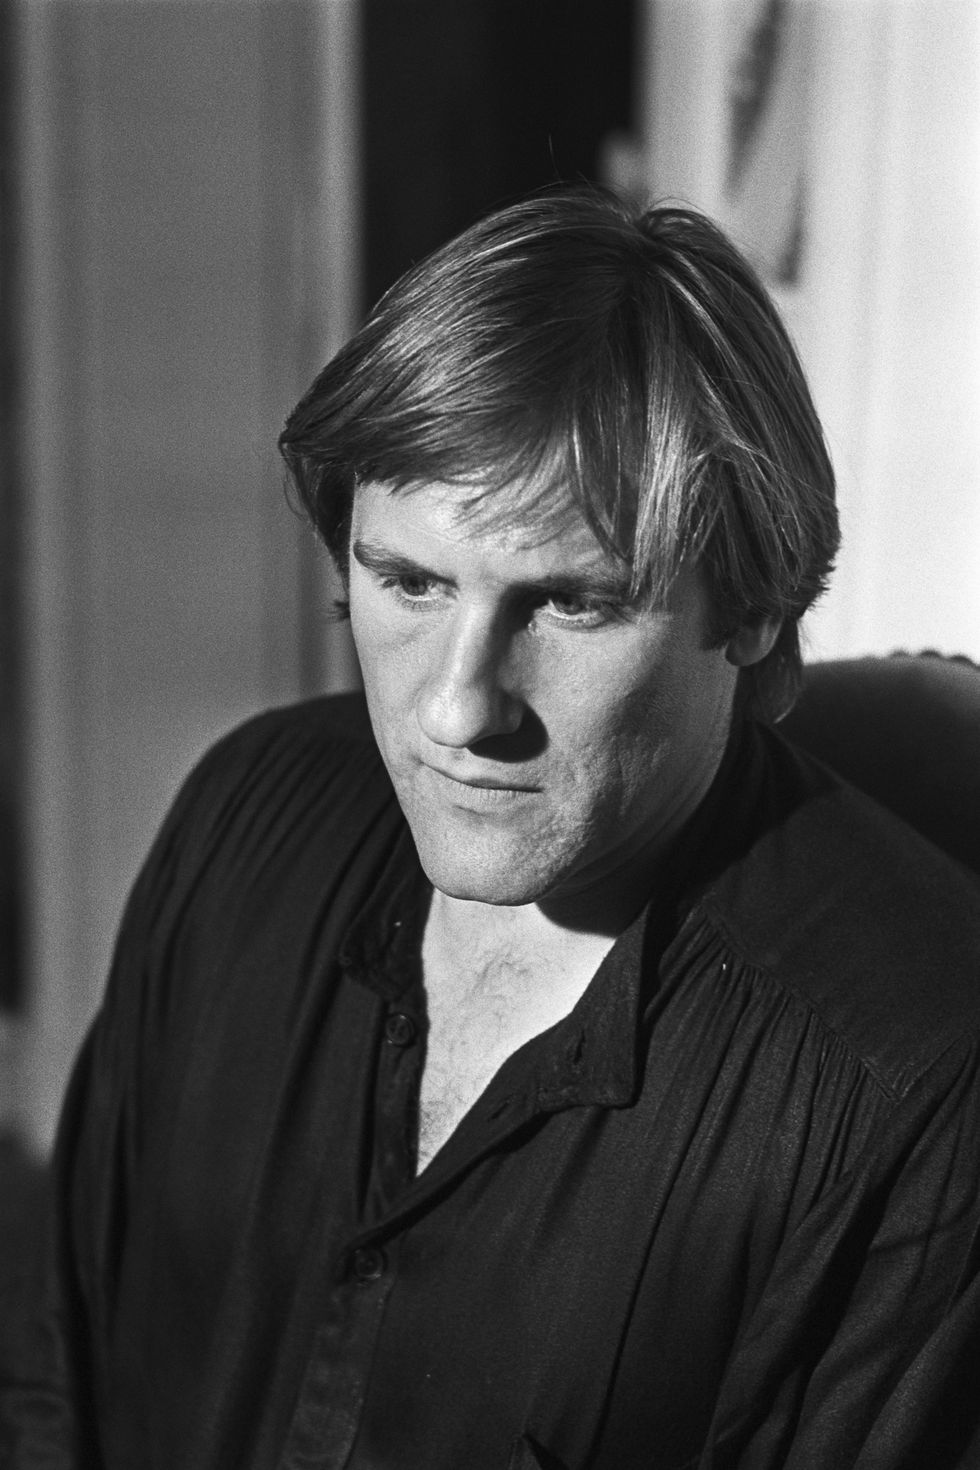 french actor gerard depardieu at journal internationales georges brassens photo by pascal parrotsygmasygma via getty images